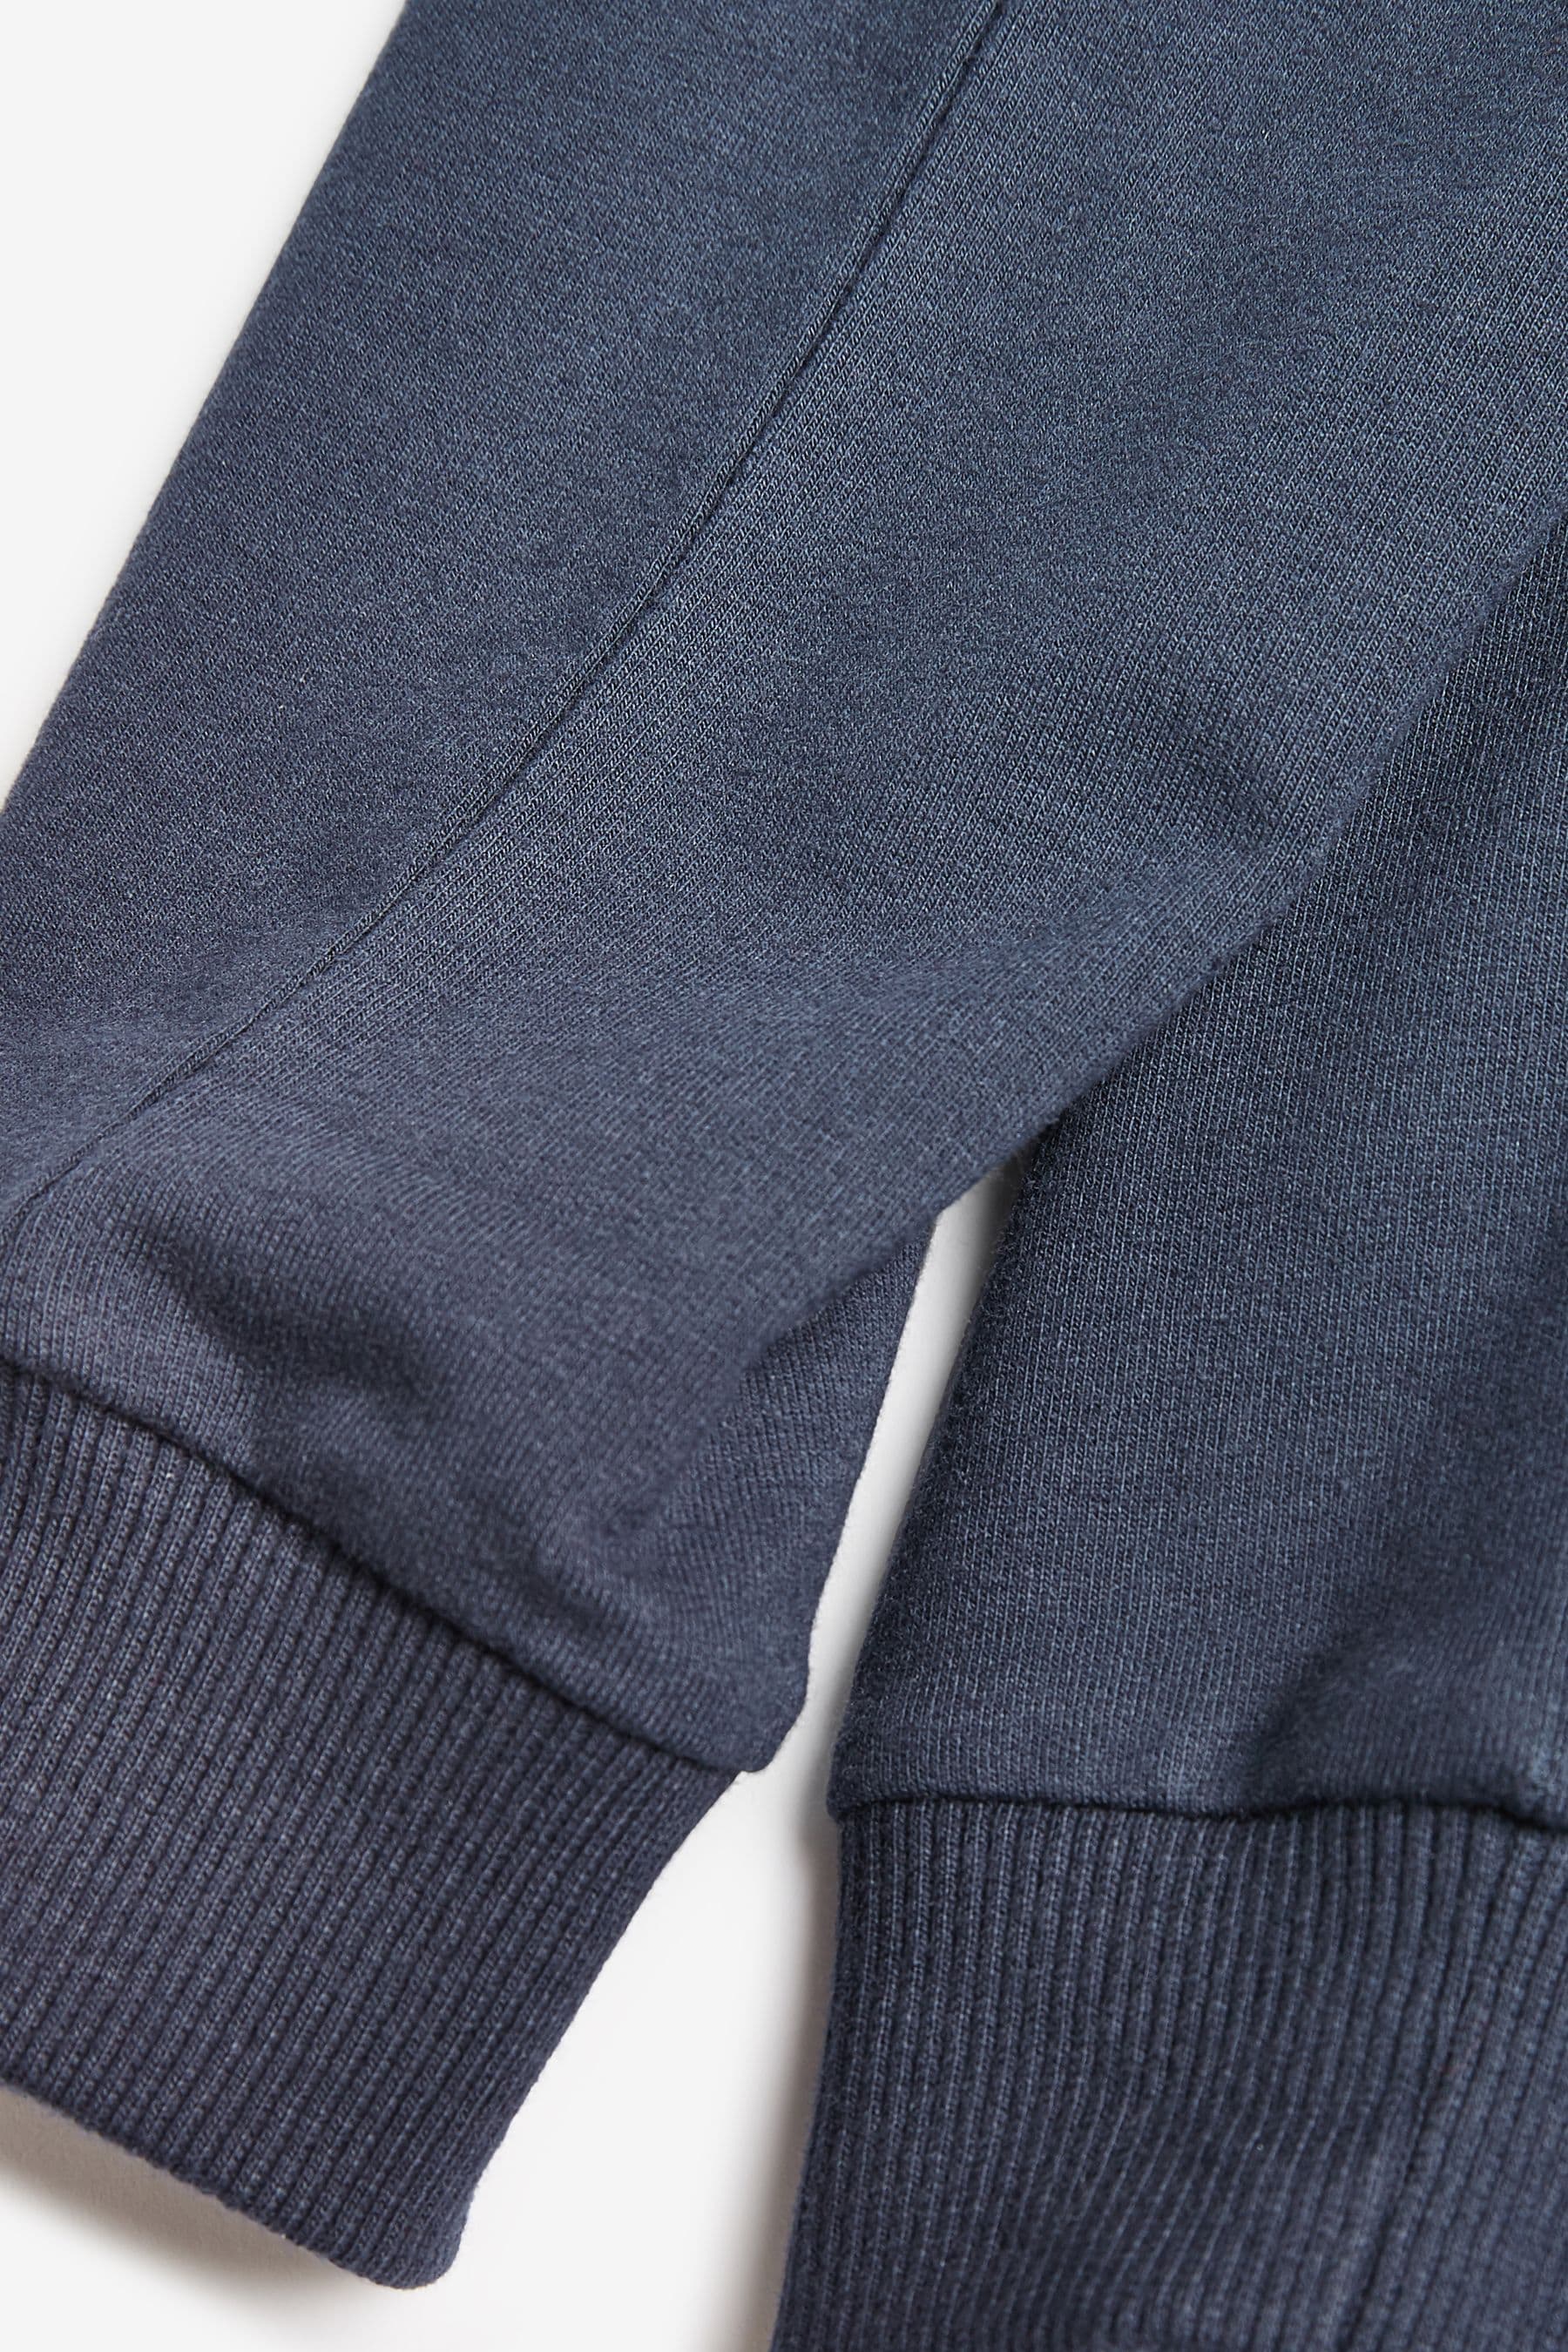 Buy Navy Blue Skinny Fit Joggers (3-16yrs) from the Next UK online shop